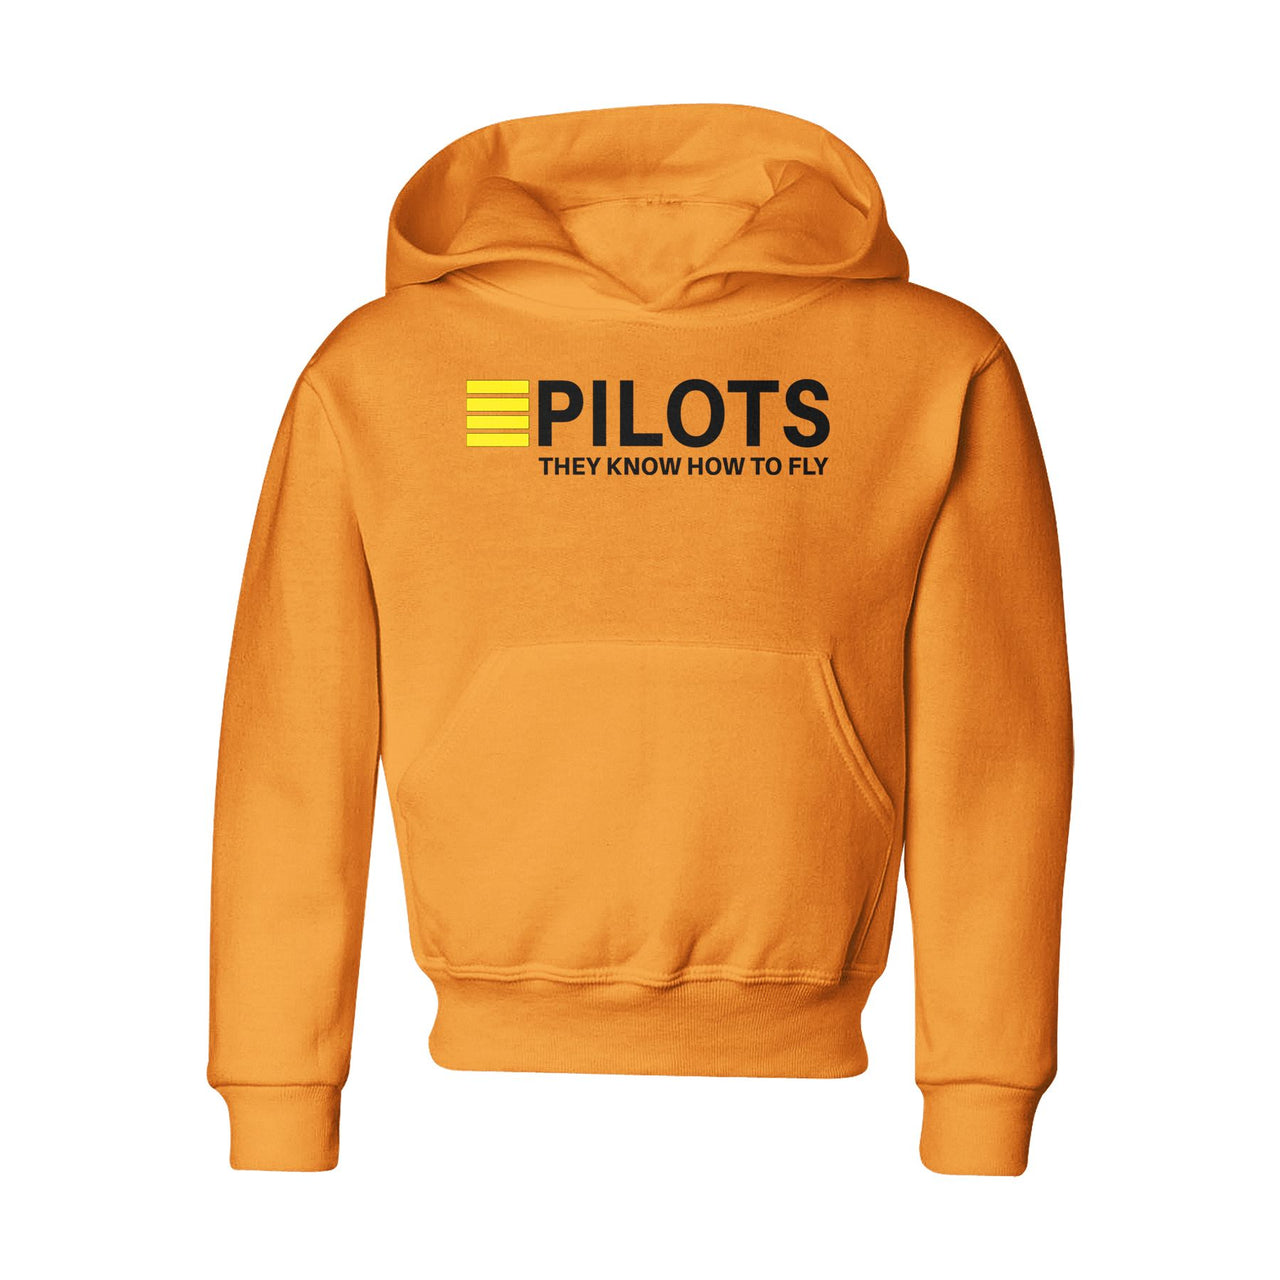 Pilots They Know How To Fly Designed "CHILDREN" Hoodies